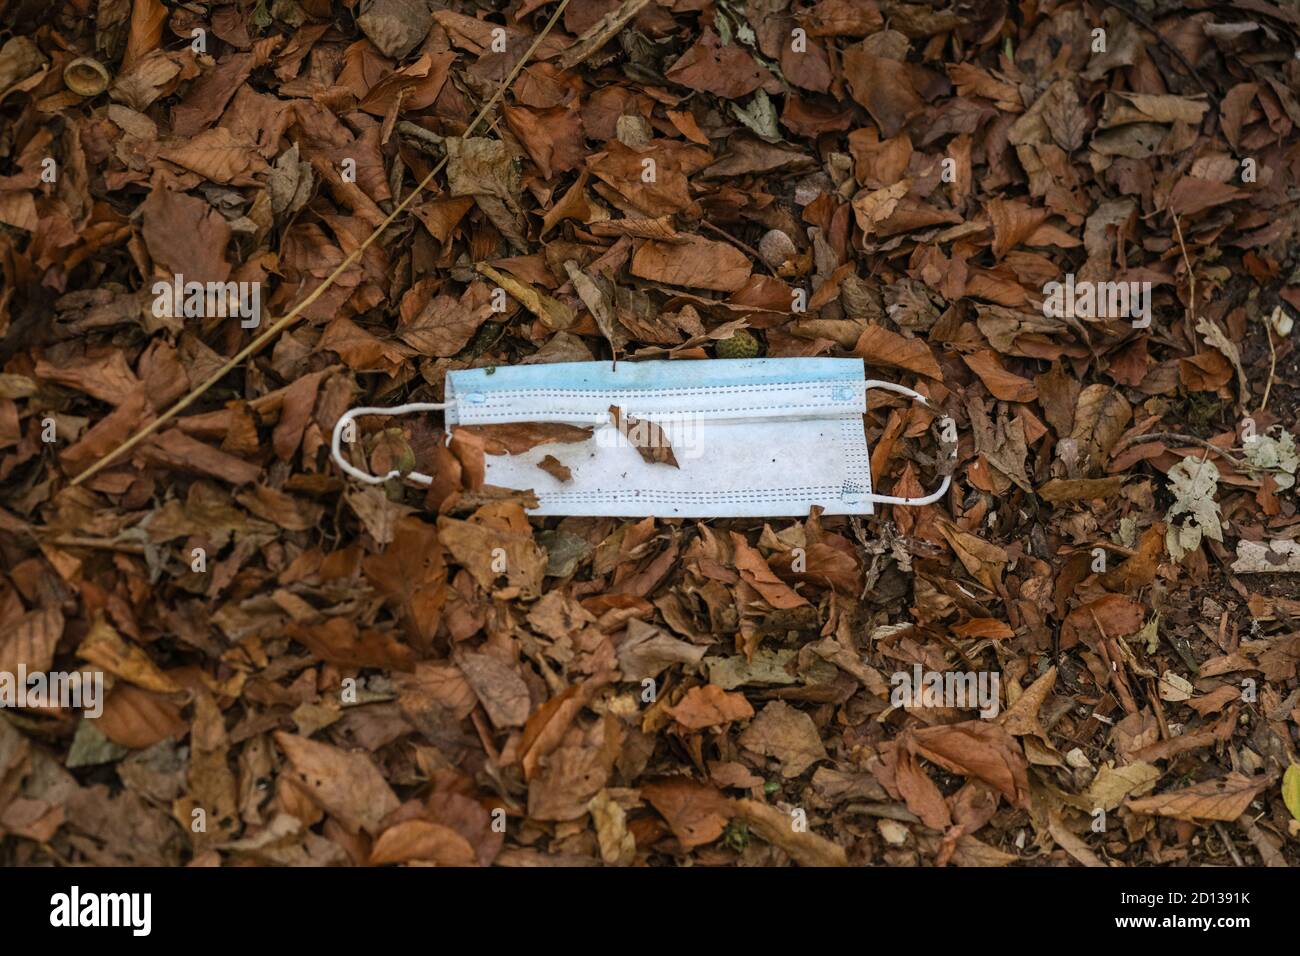 Face mask discarded in autumn leaves during the covid 19 coronavirus pandemic in 2020 Stock Photo